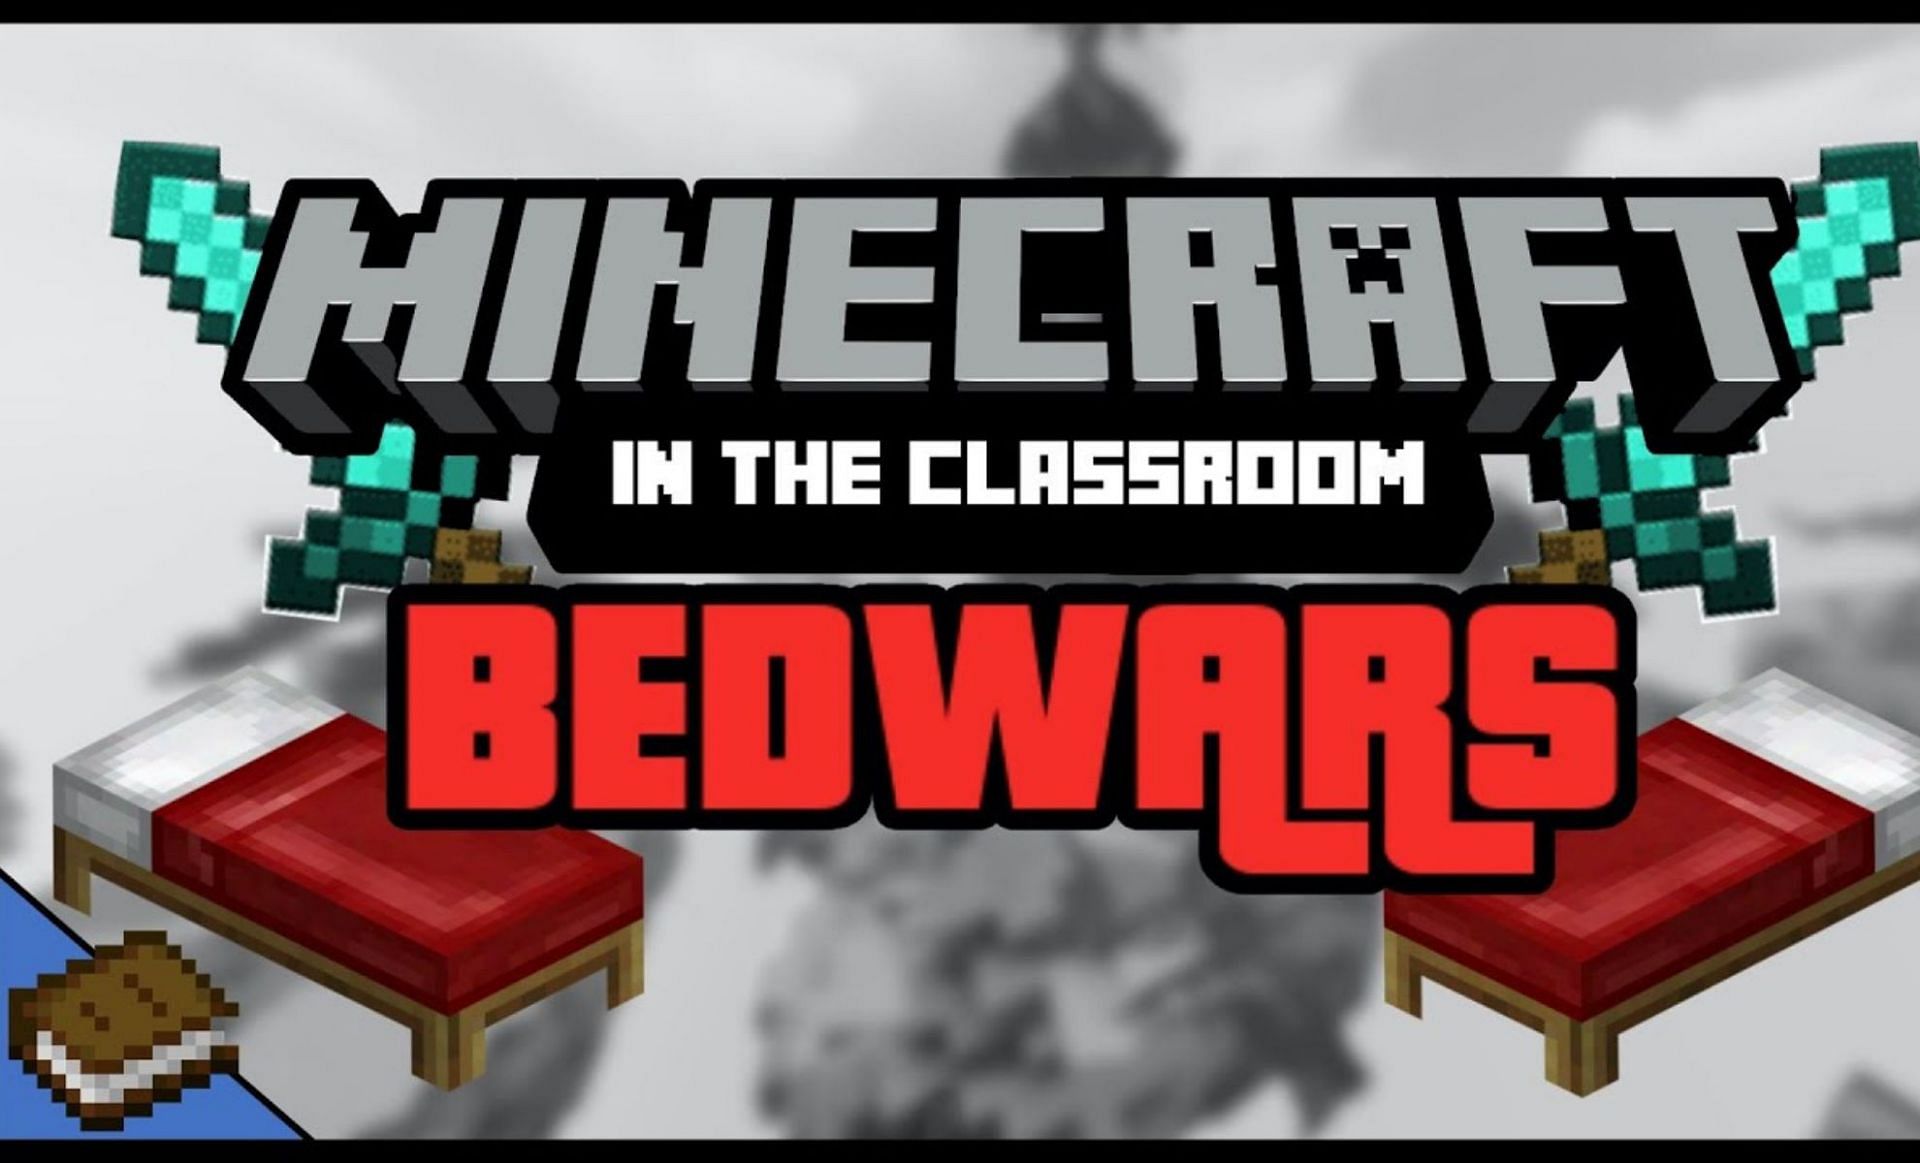 Bedwars is arguably the most popular game mode in Minecraft (Image via Minecraft Education Edition/YouTube)